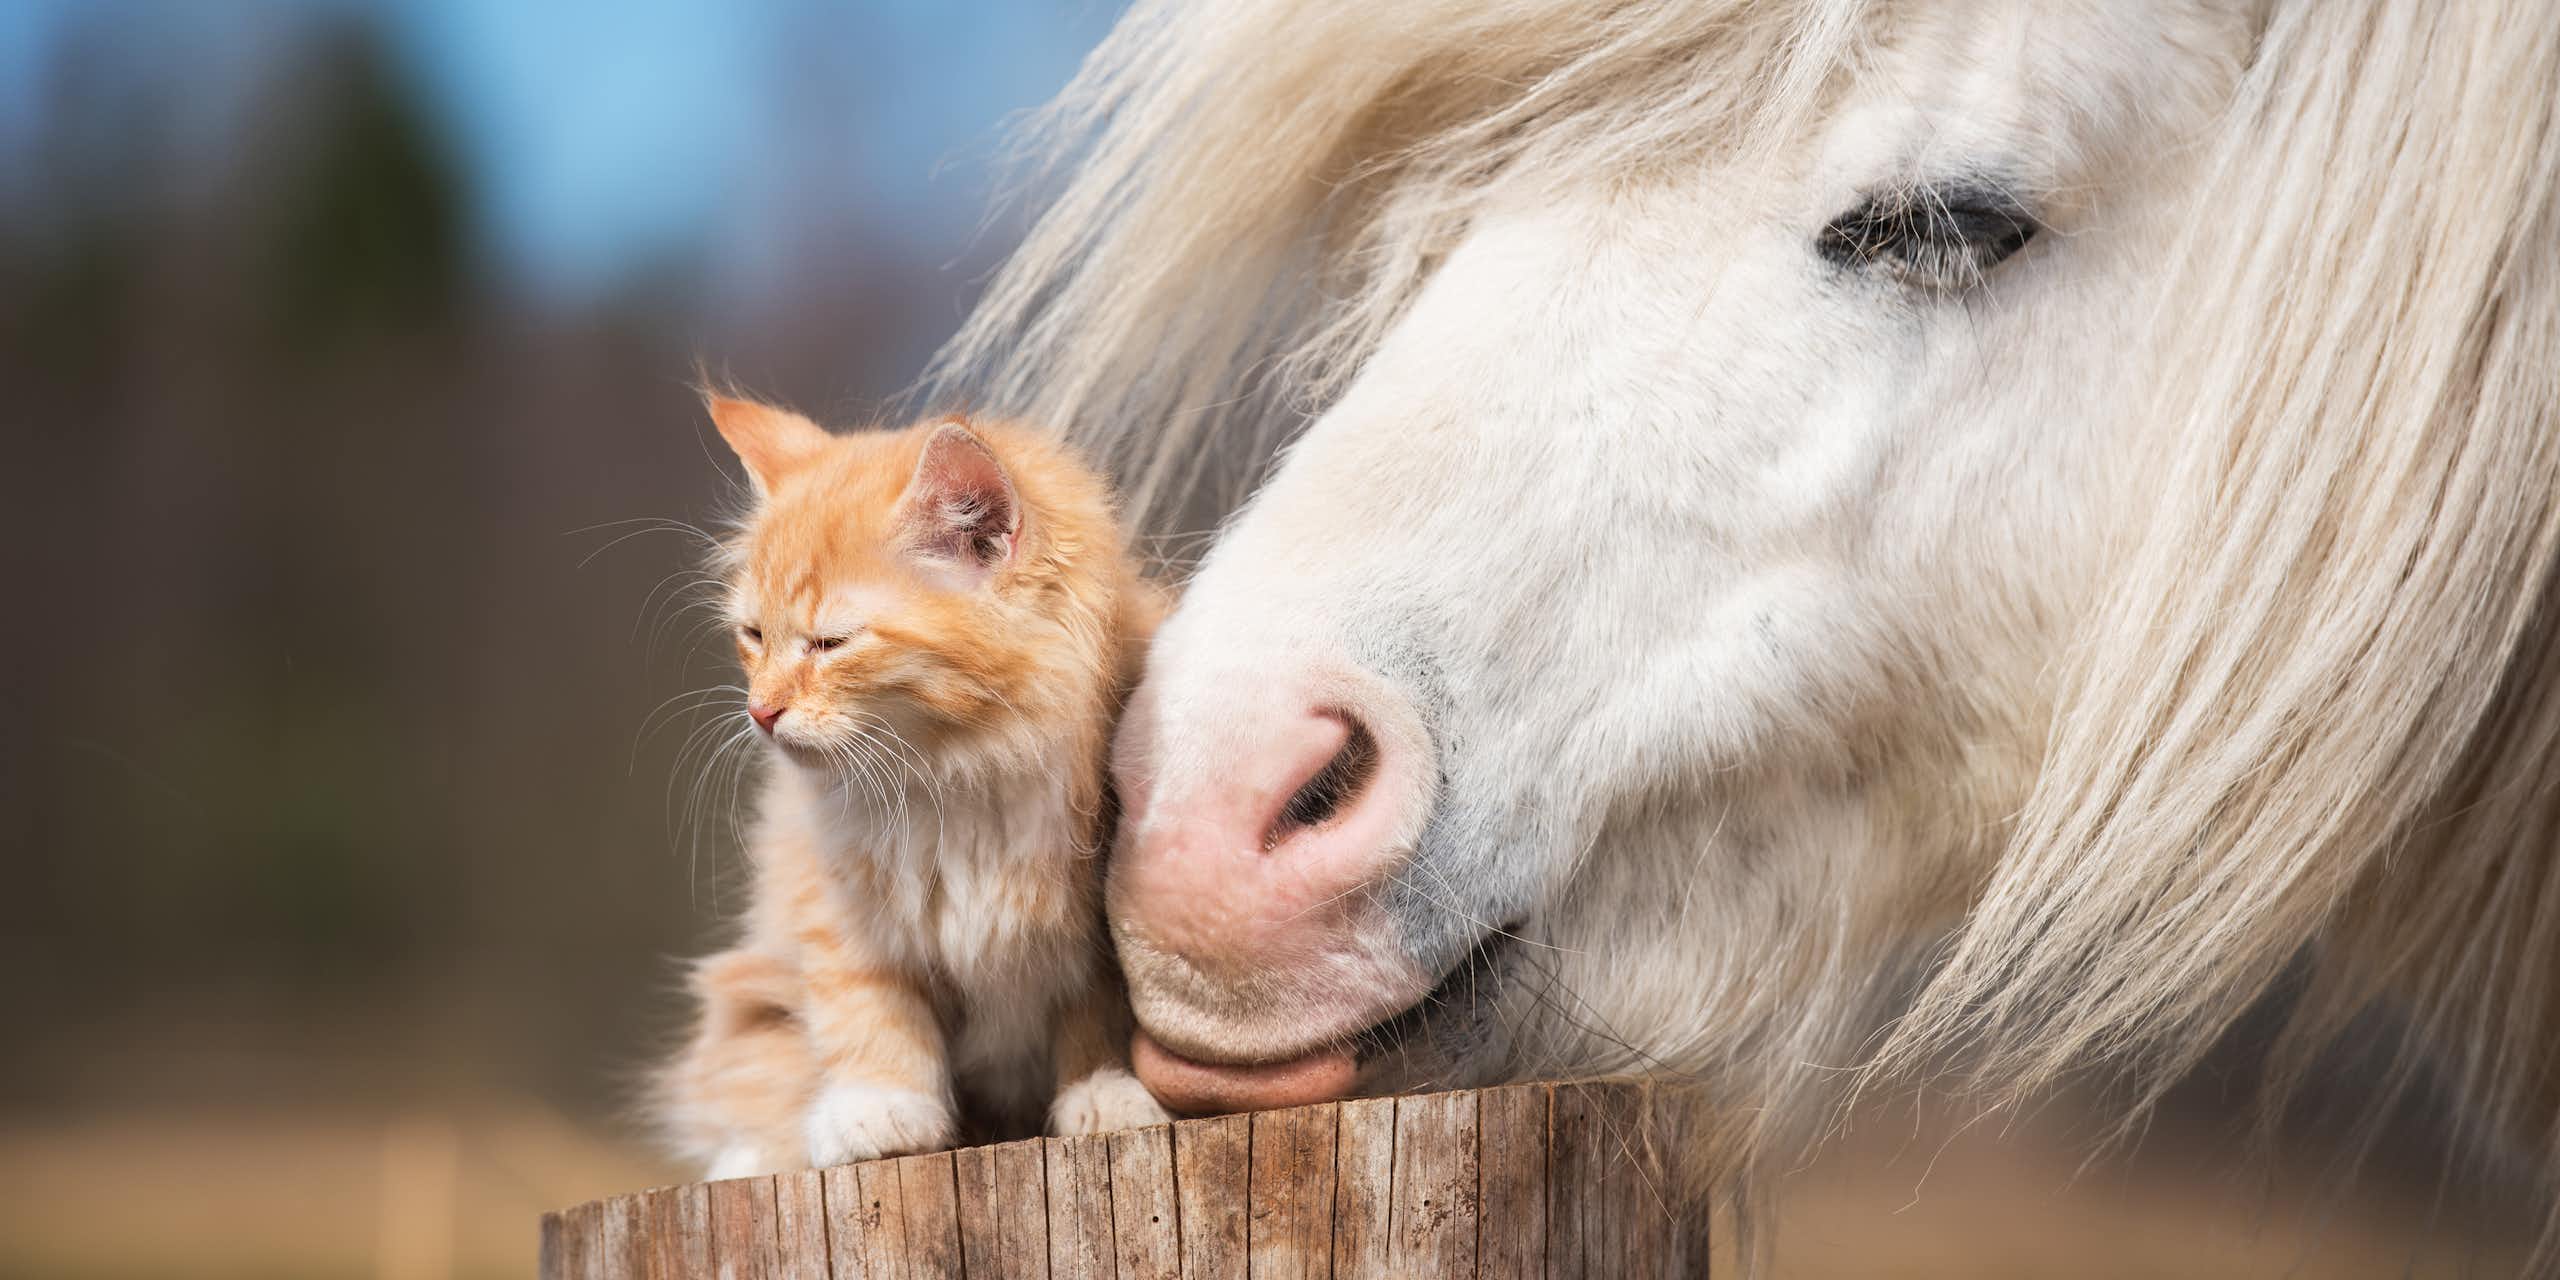 Why do we love to see unlikely animal friendships? A psychology expert explains